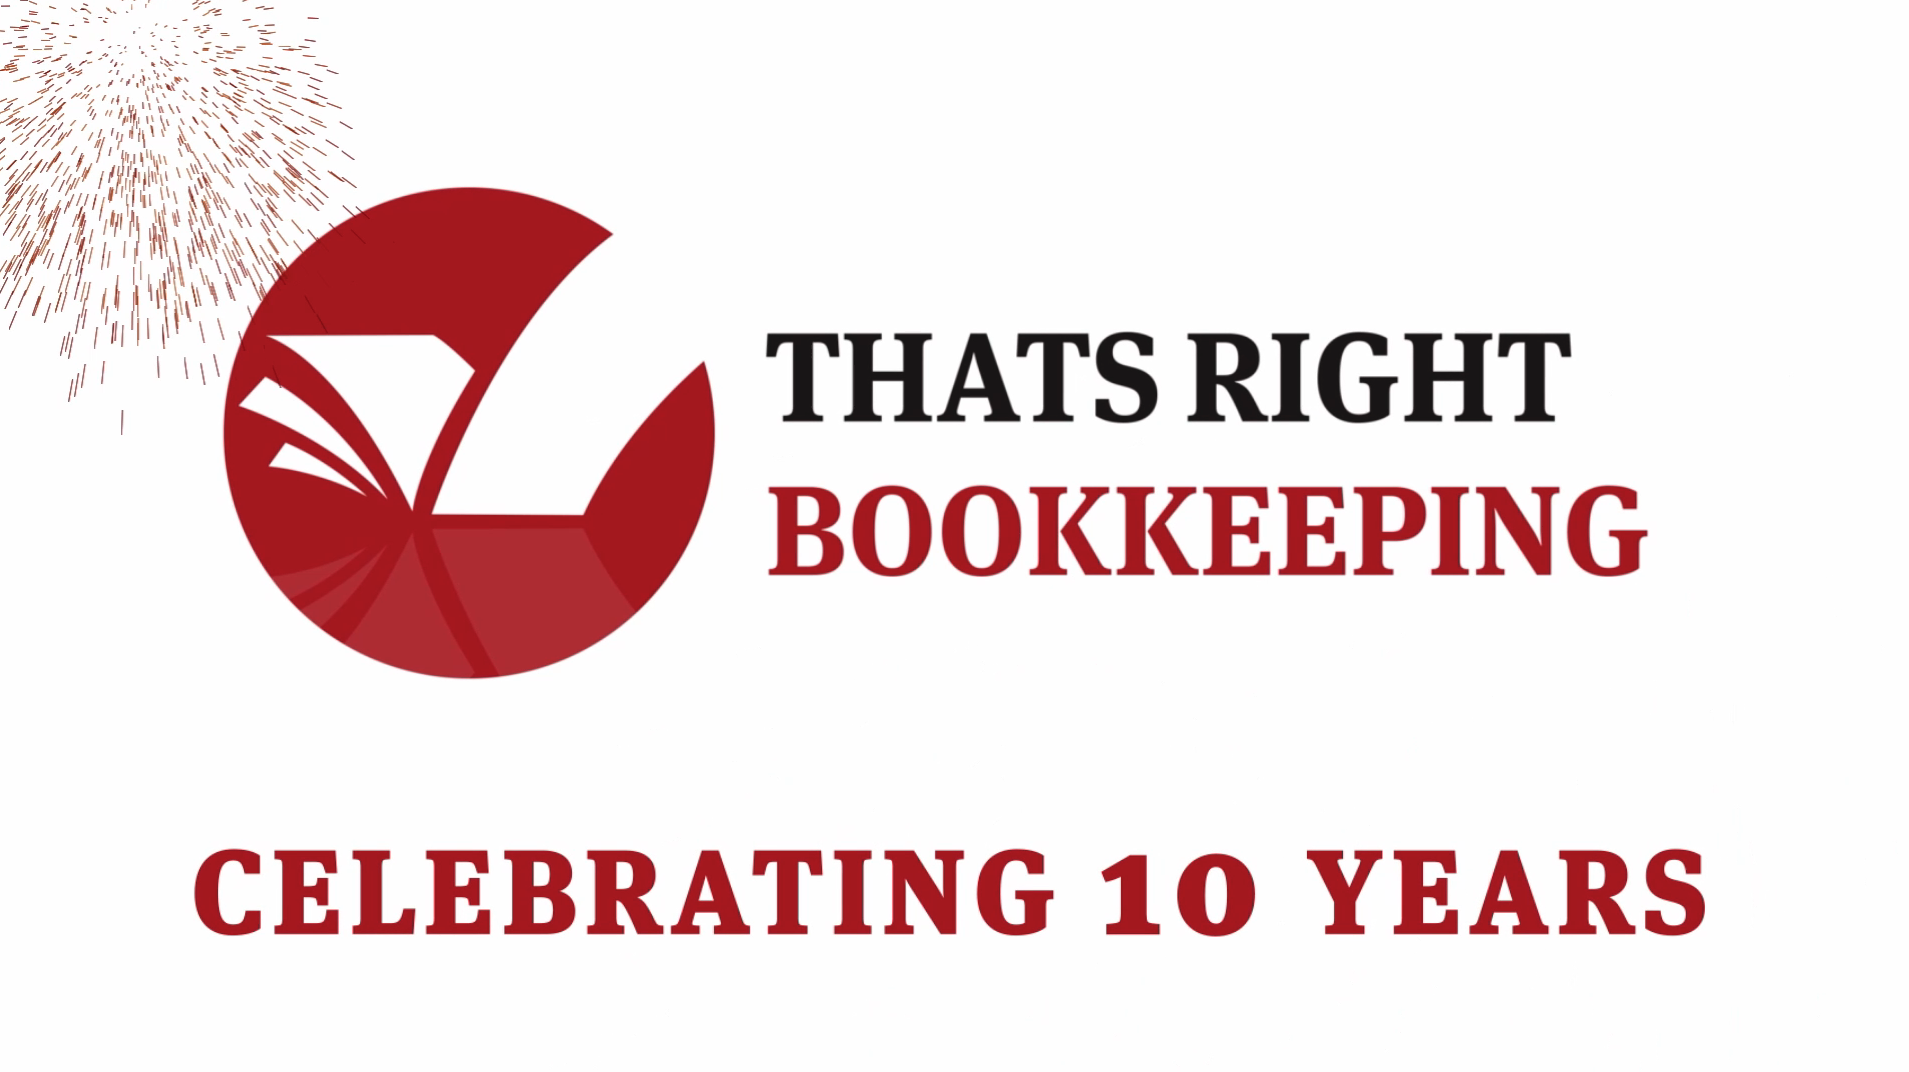 Thats Right Bookkeeping Celebrates 10 Years in Business